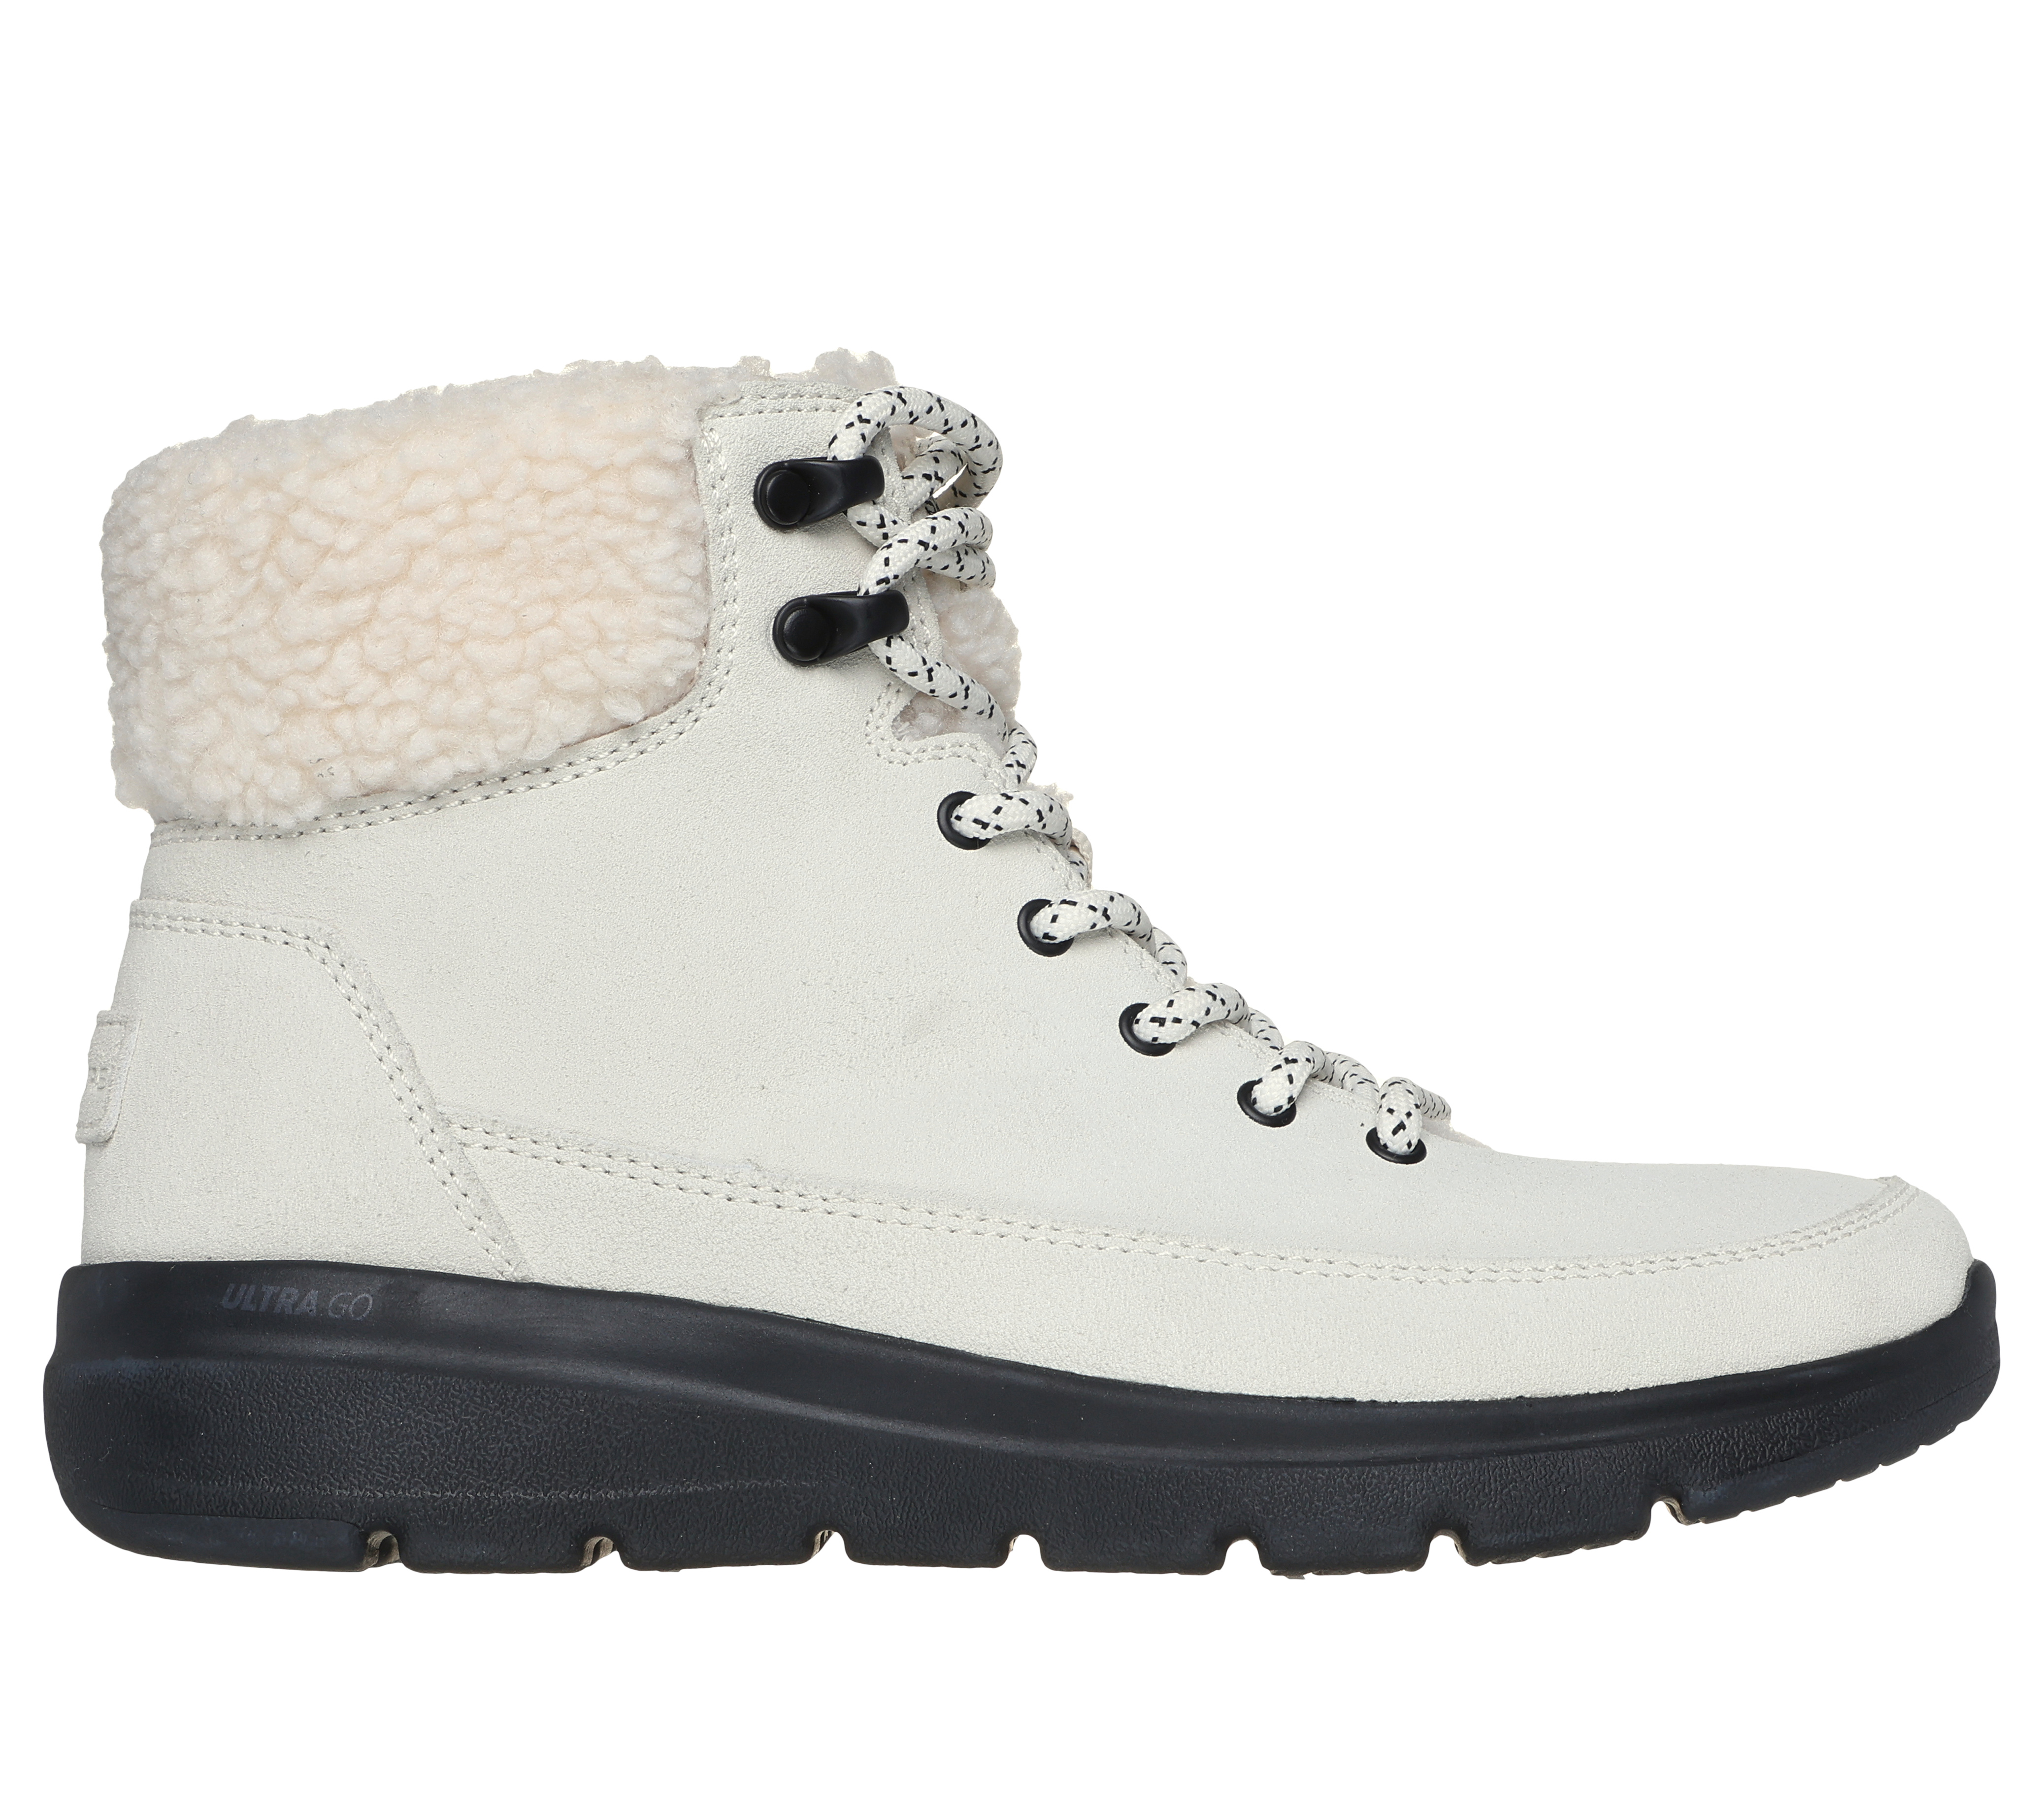 skechers cold weather boots